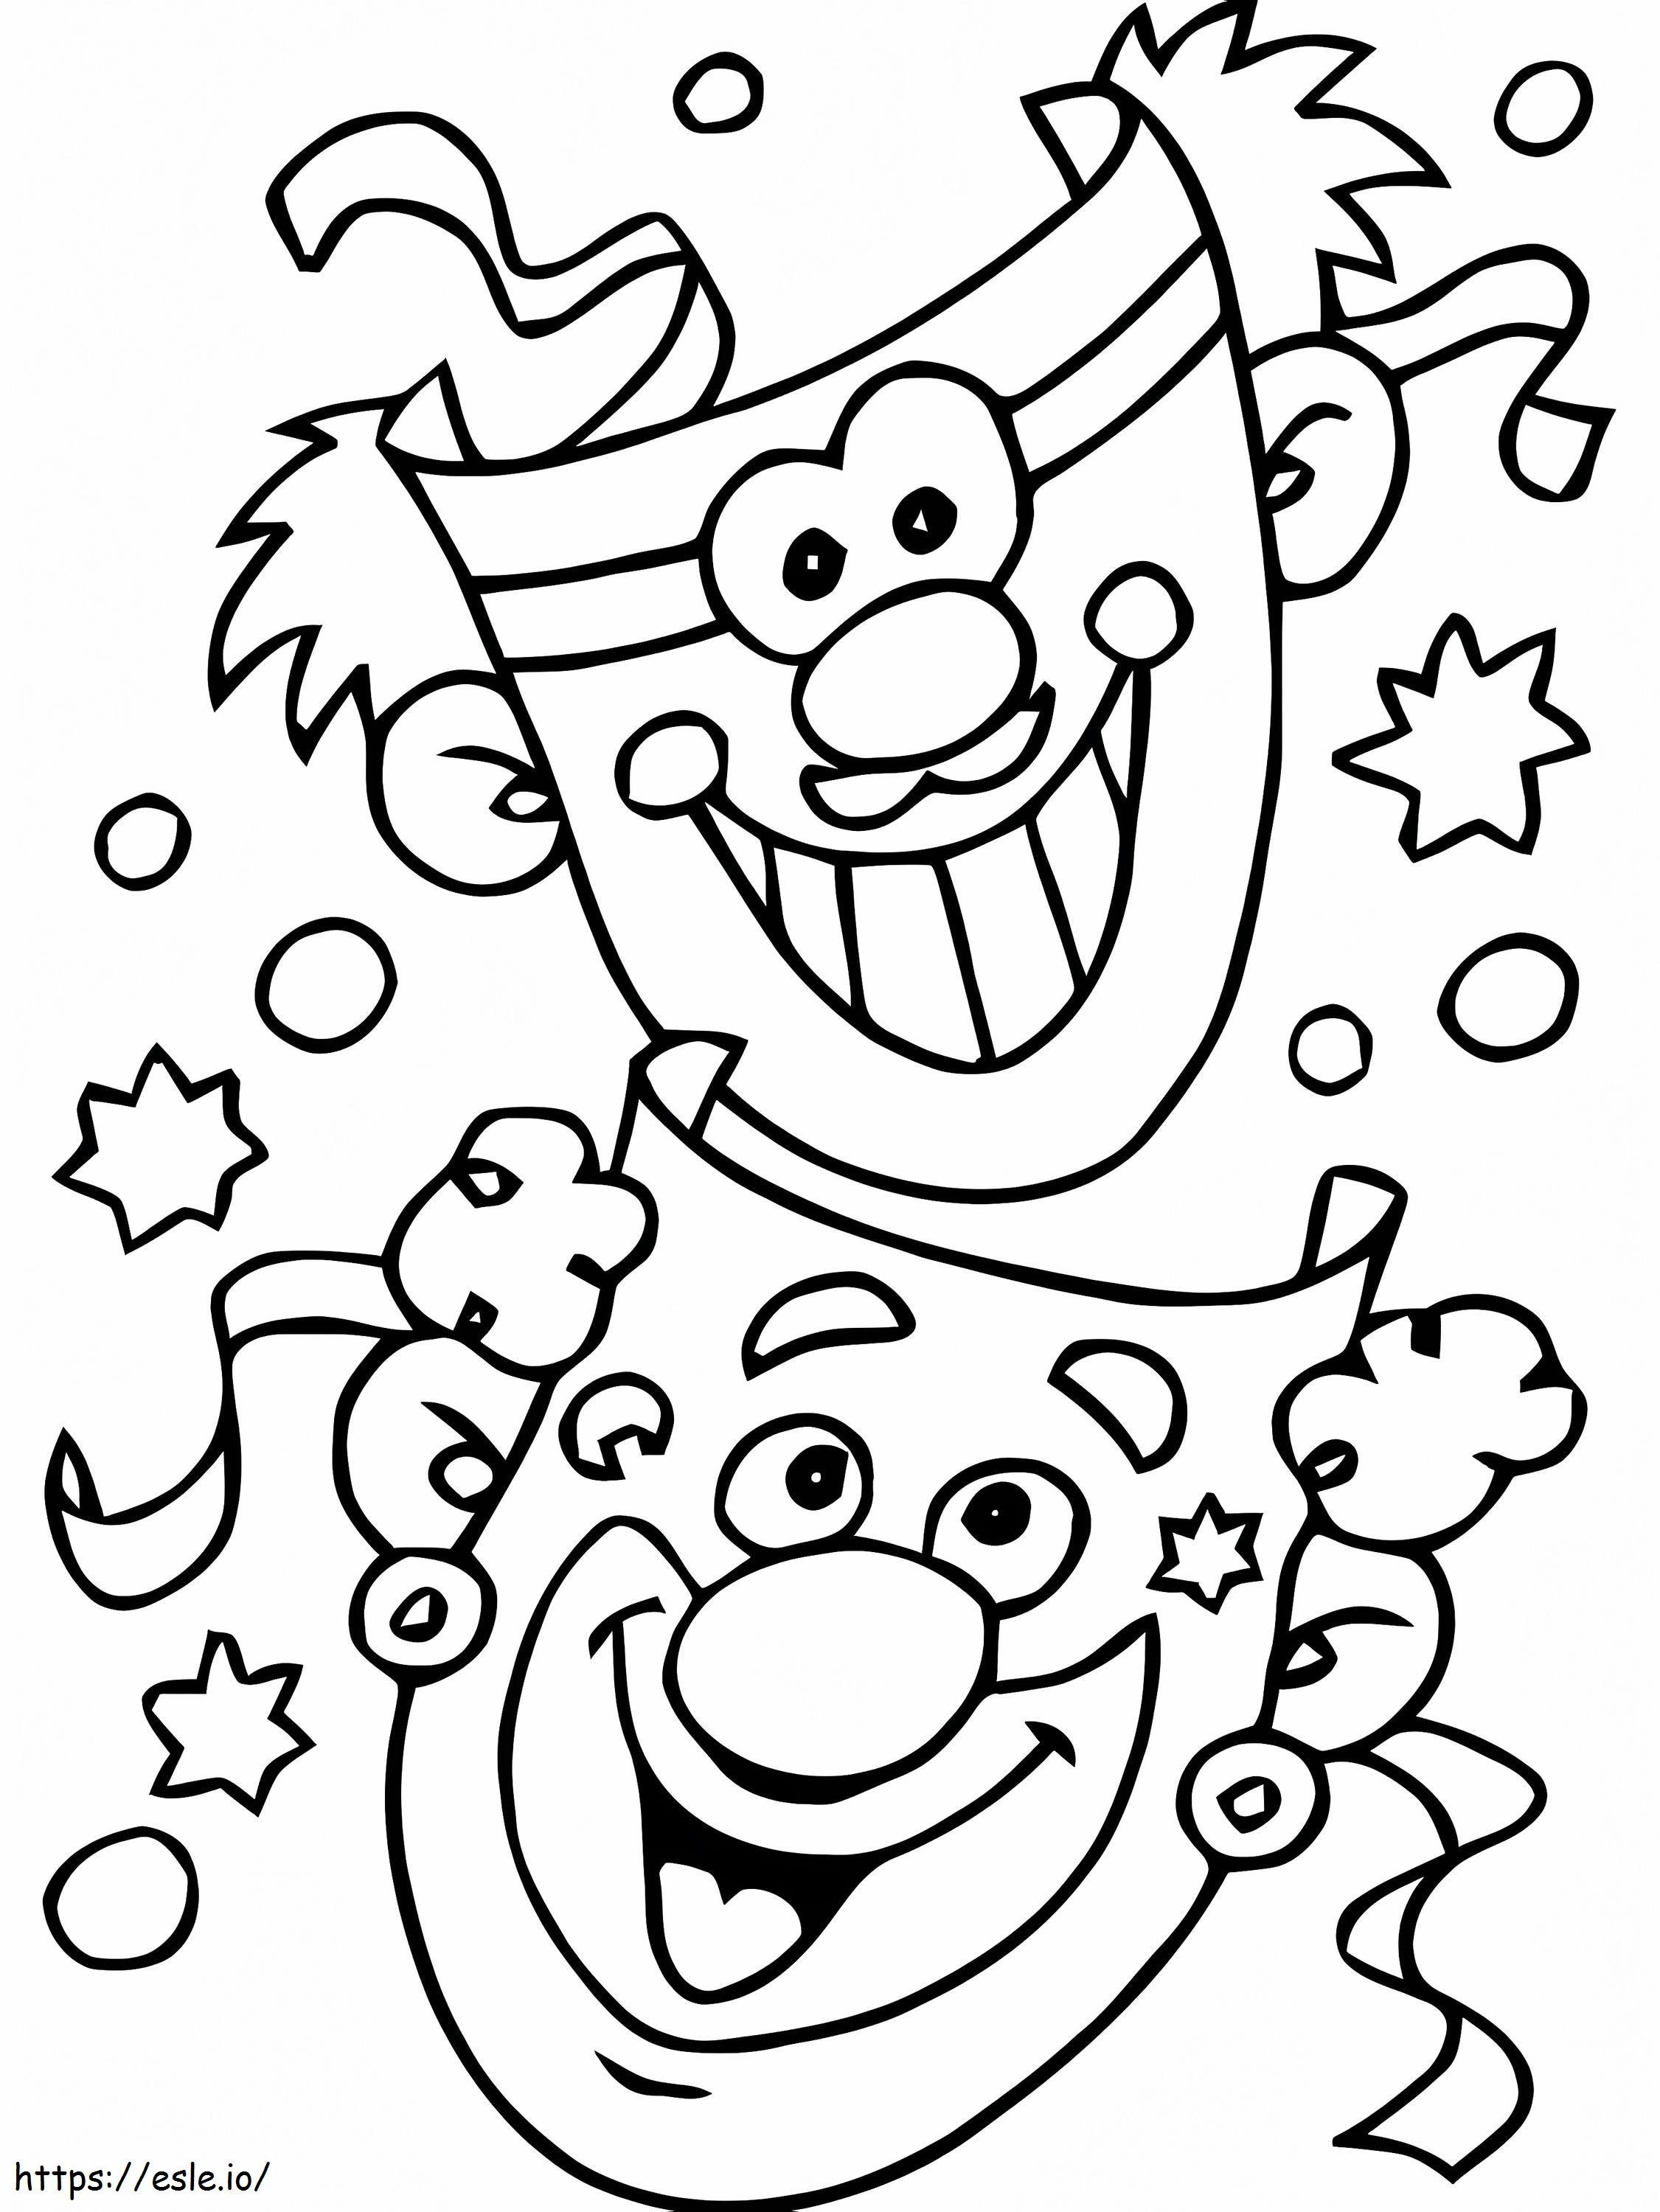 Carnival Festival coloring page